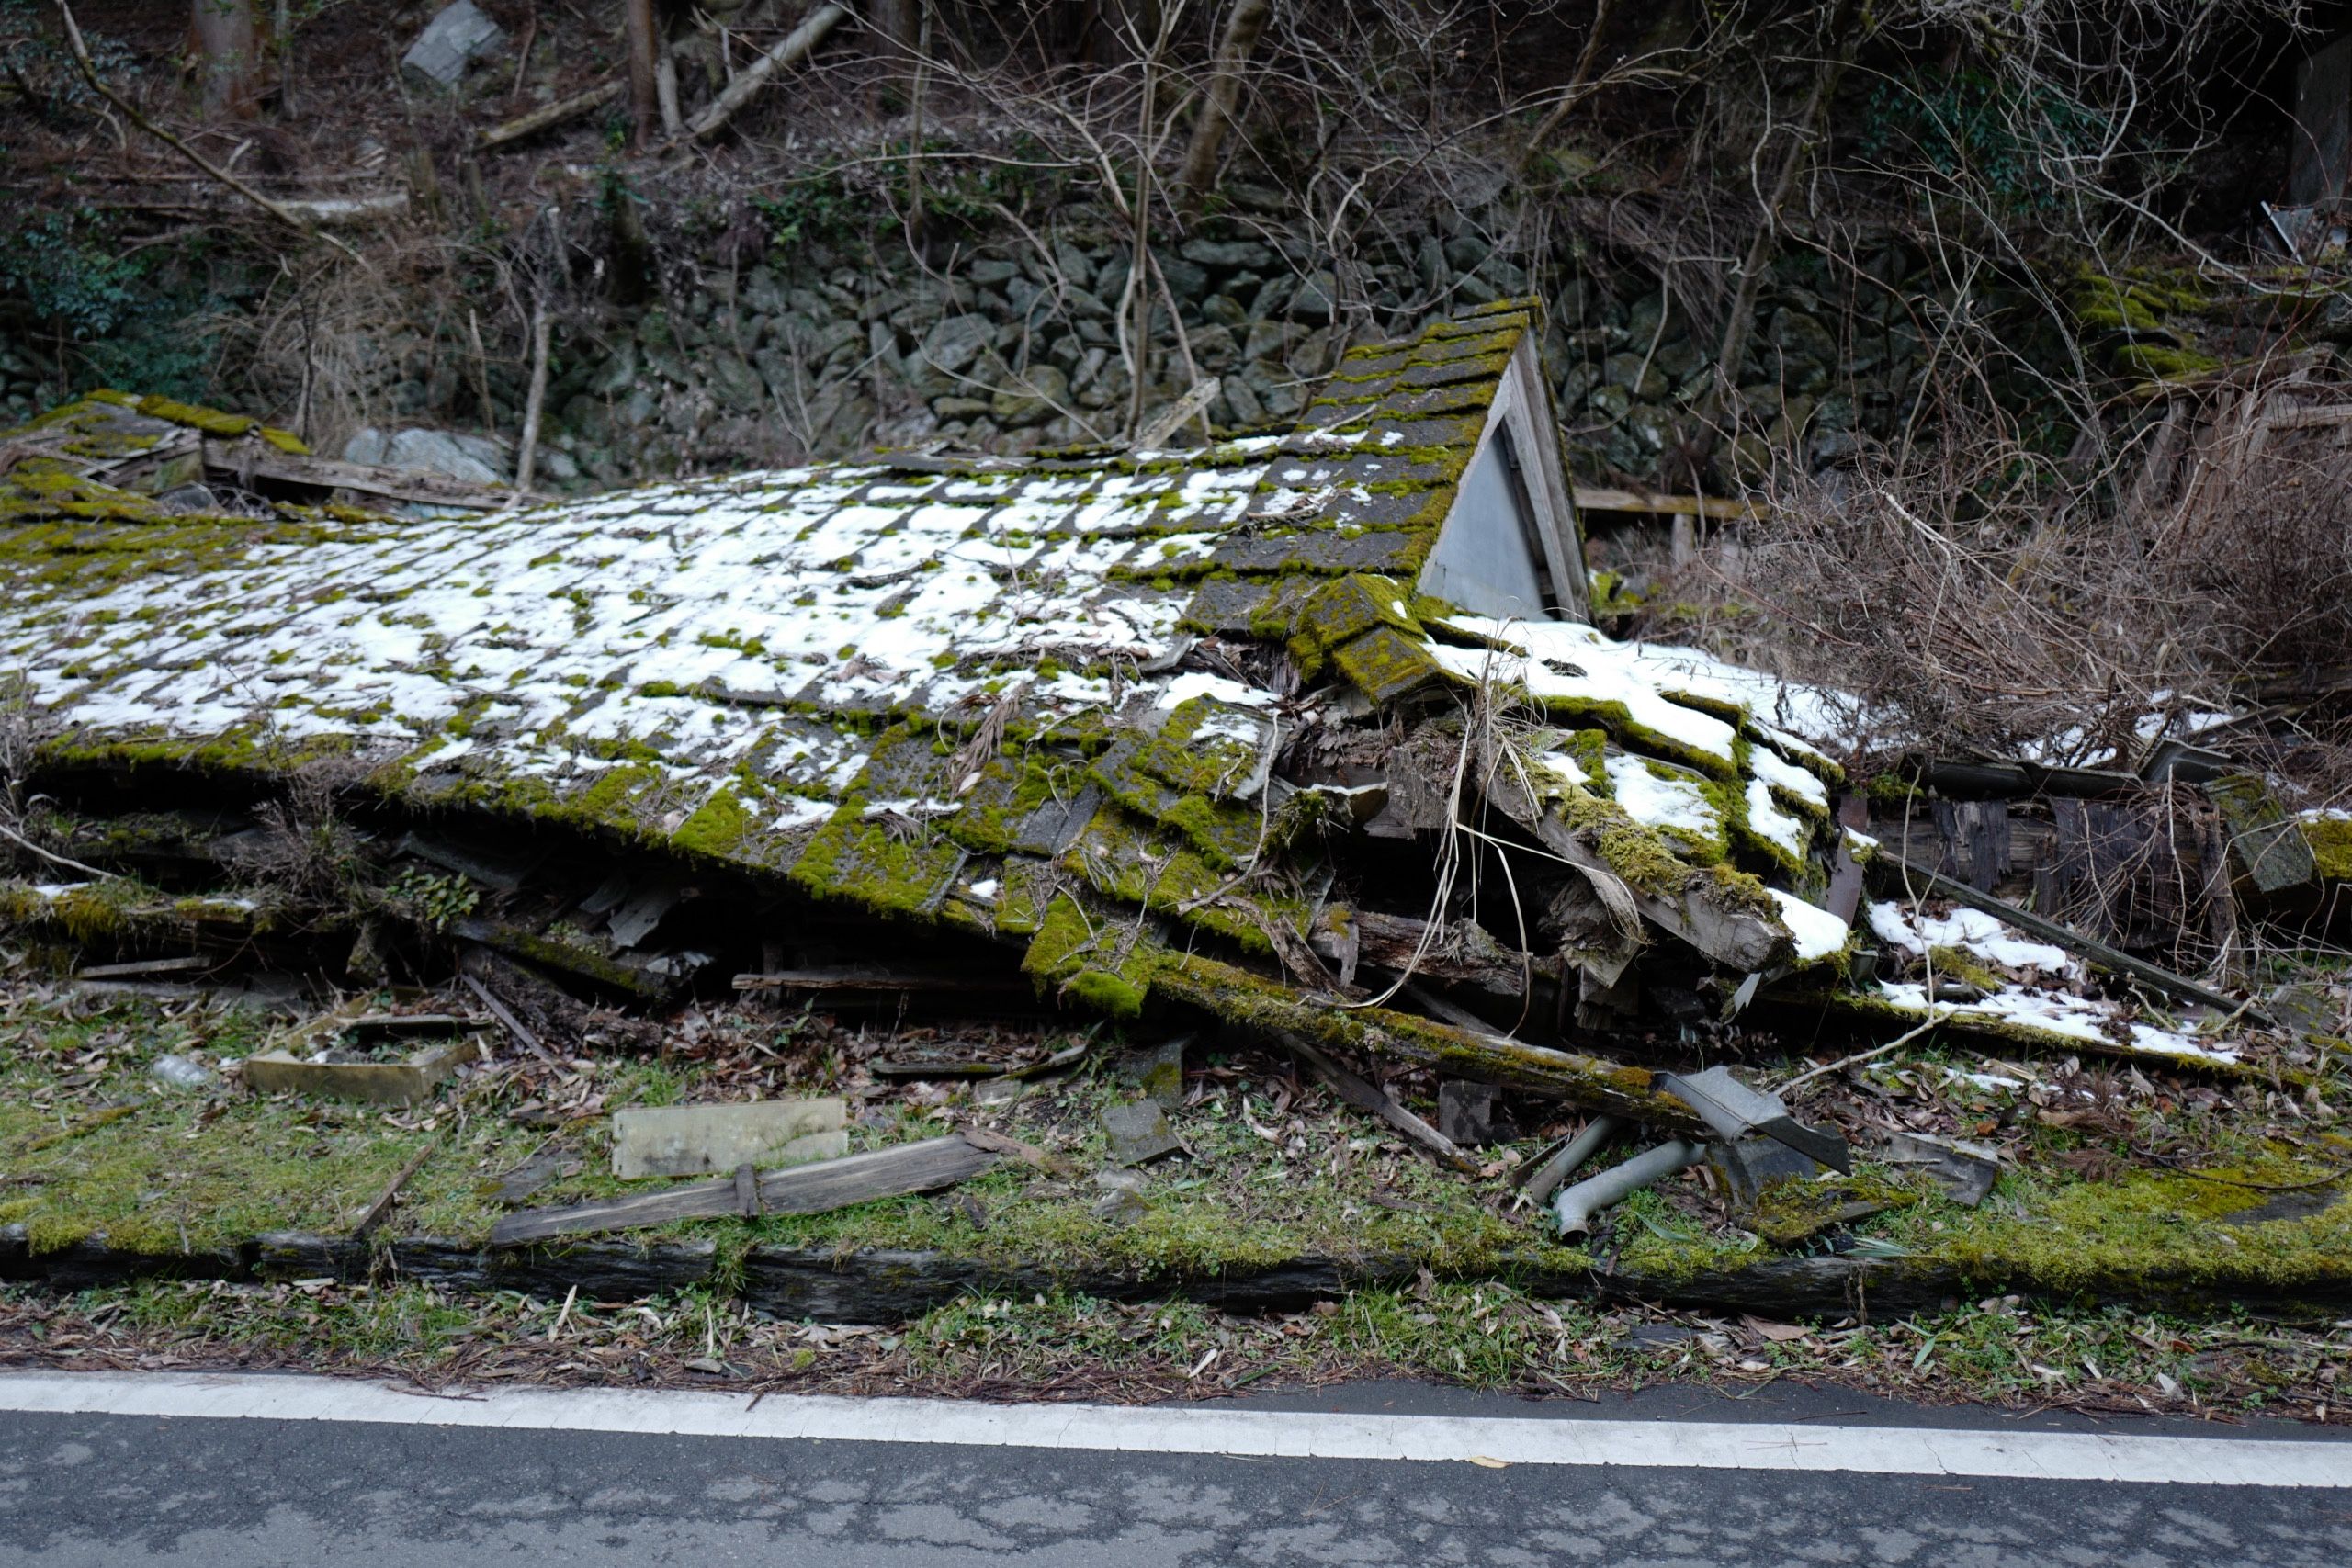 The snow- and moss-covered roof of a collapsed house.